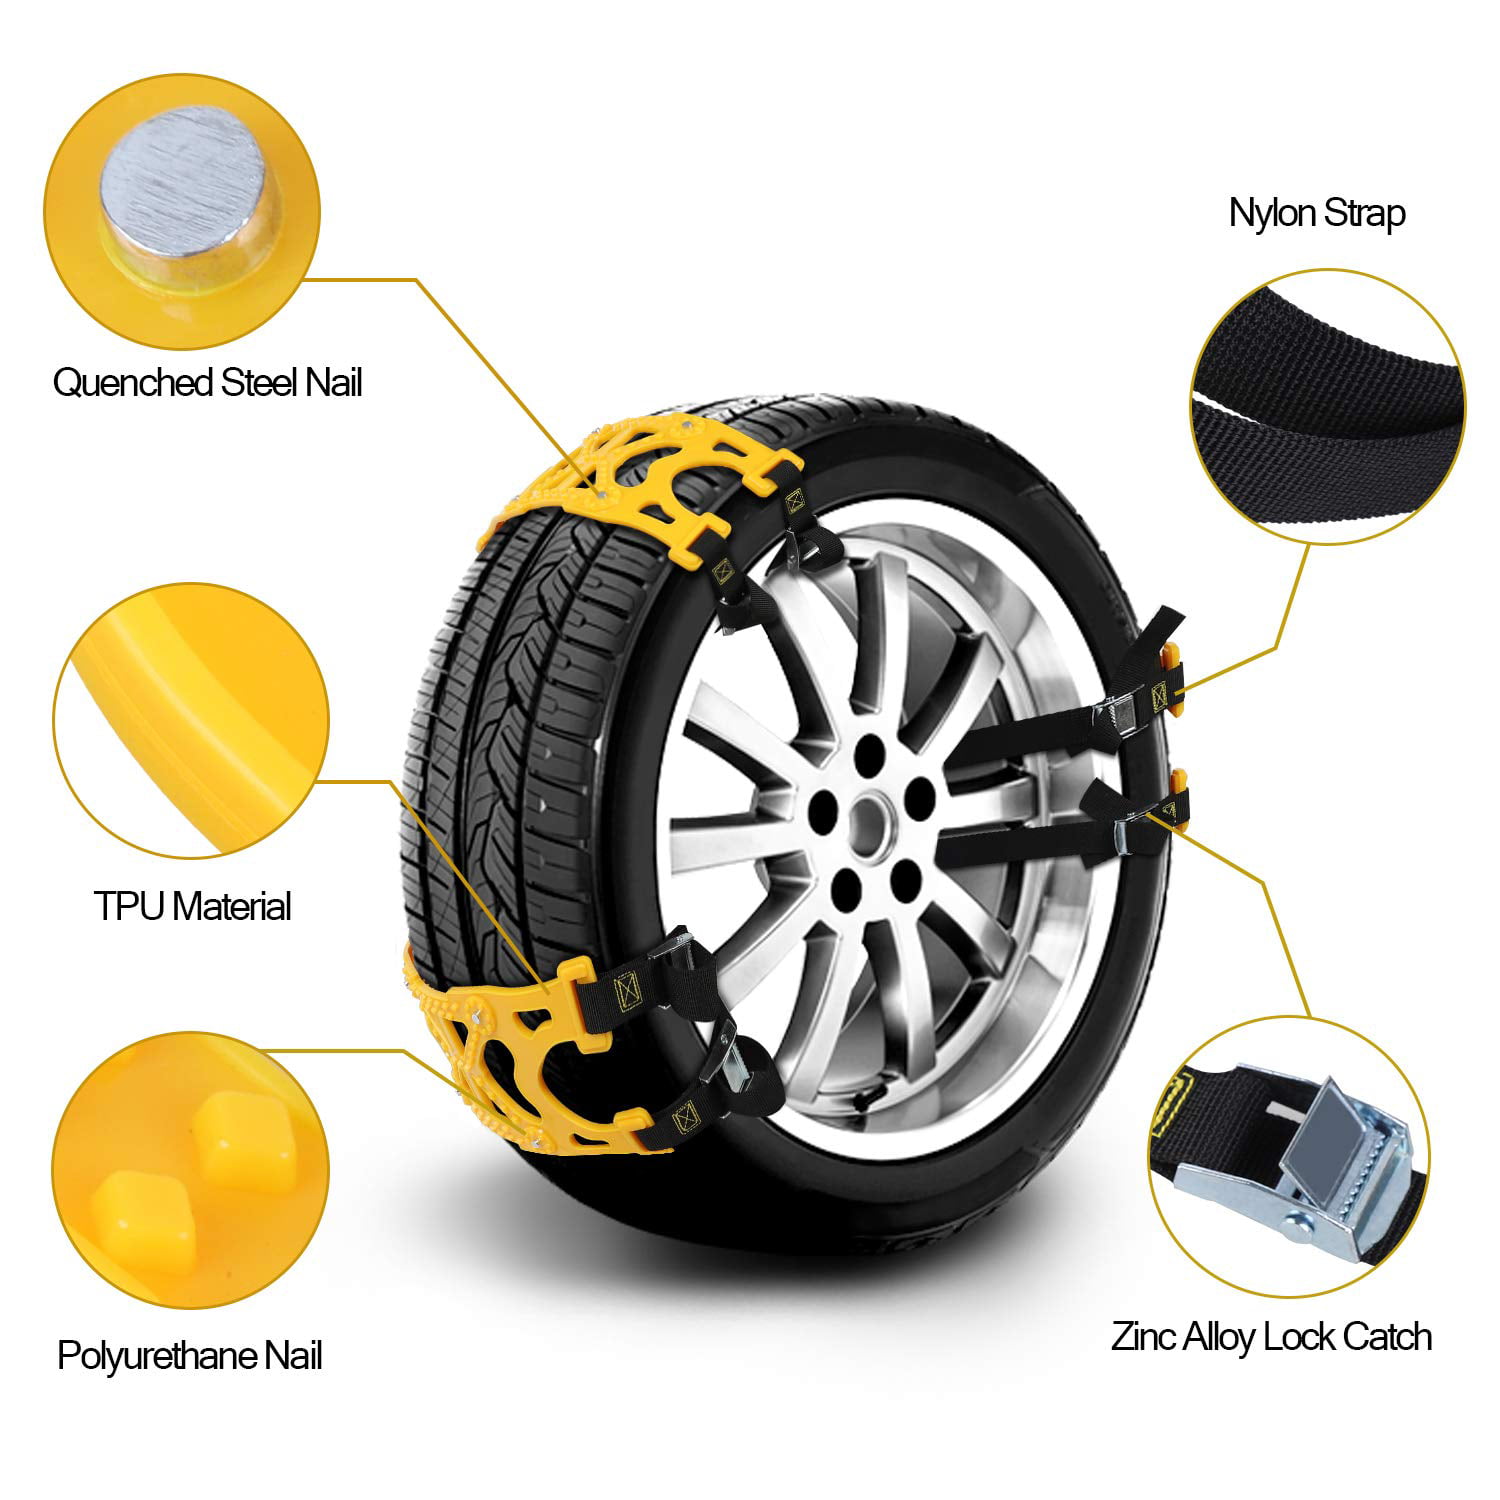 10PCS Car Winter Snow Anti-skid Wheel Nylon Tire Chains Winter Driving Security Chains Wear resistant low temperature resistant Universal Fit Tyre Width 145-295 Kwolf Anti-skid Wheel Tire Chains